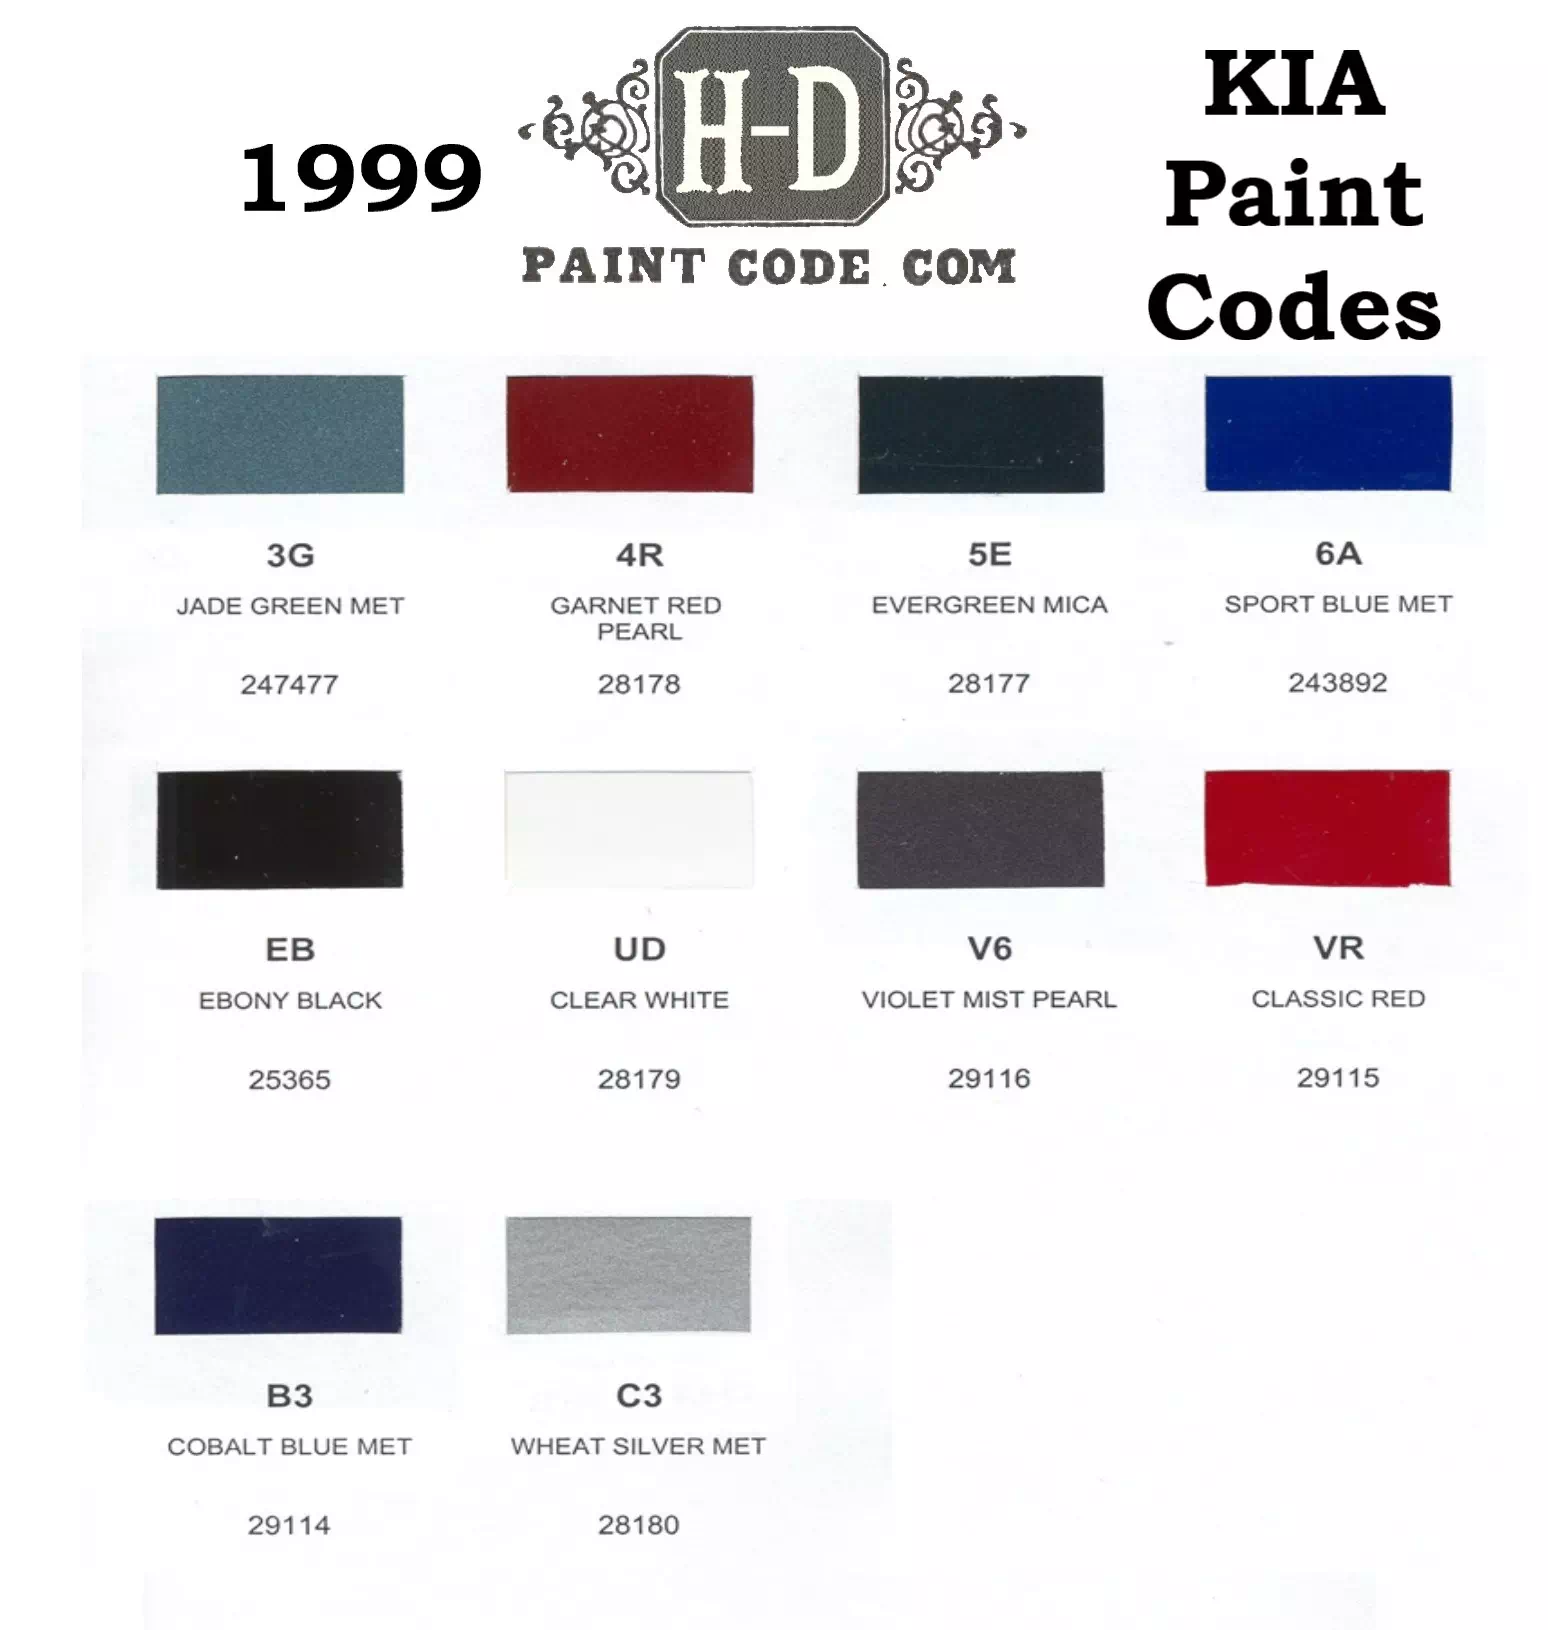 Exterior Colors used on Kia Vehicles in 1999